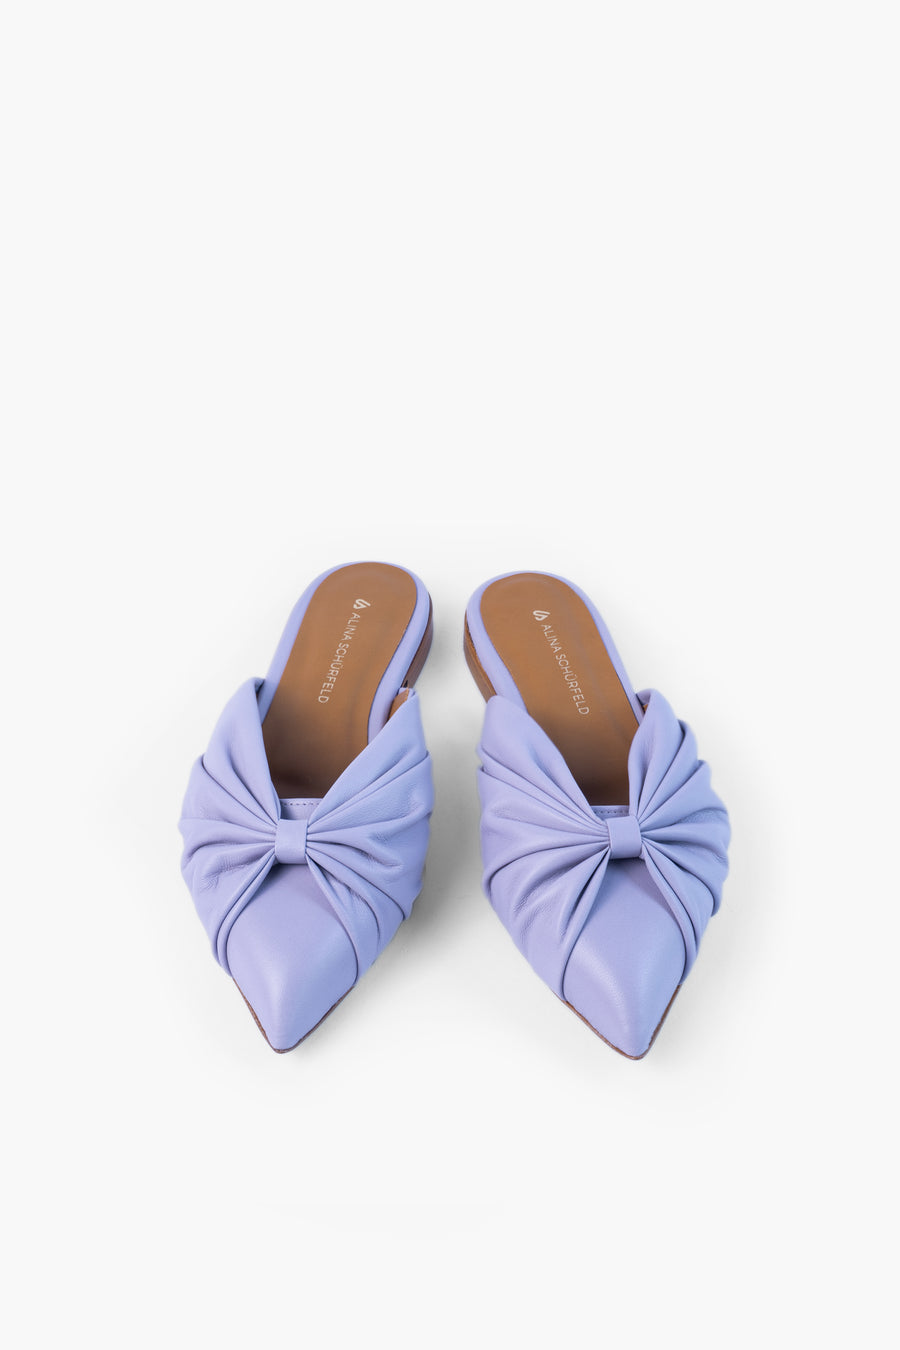 Sustainable, lilac coloured TILDA slippers with plissee, locally produced in Hamburg. Made from metal-free leather. Made in Germany by Alina Schürfeld. 